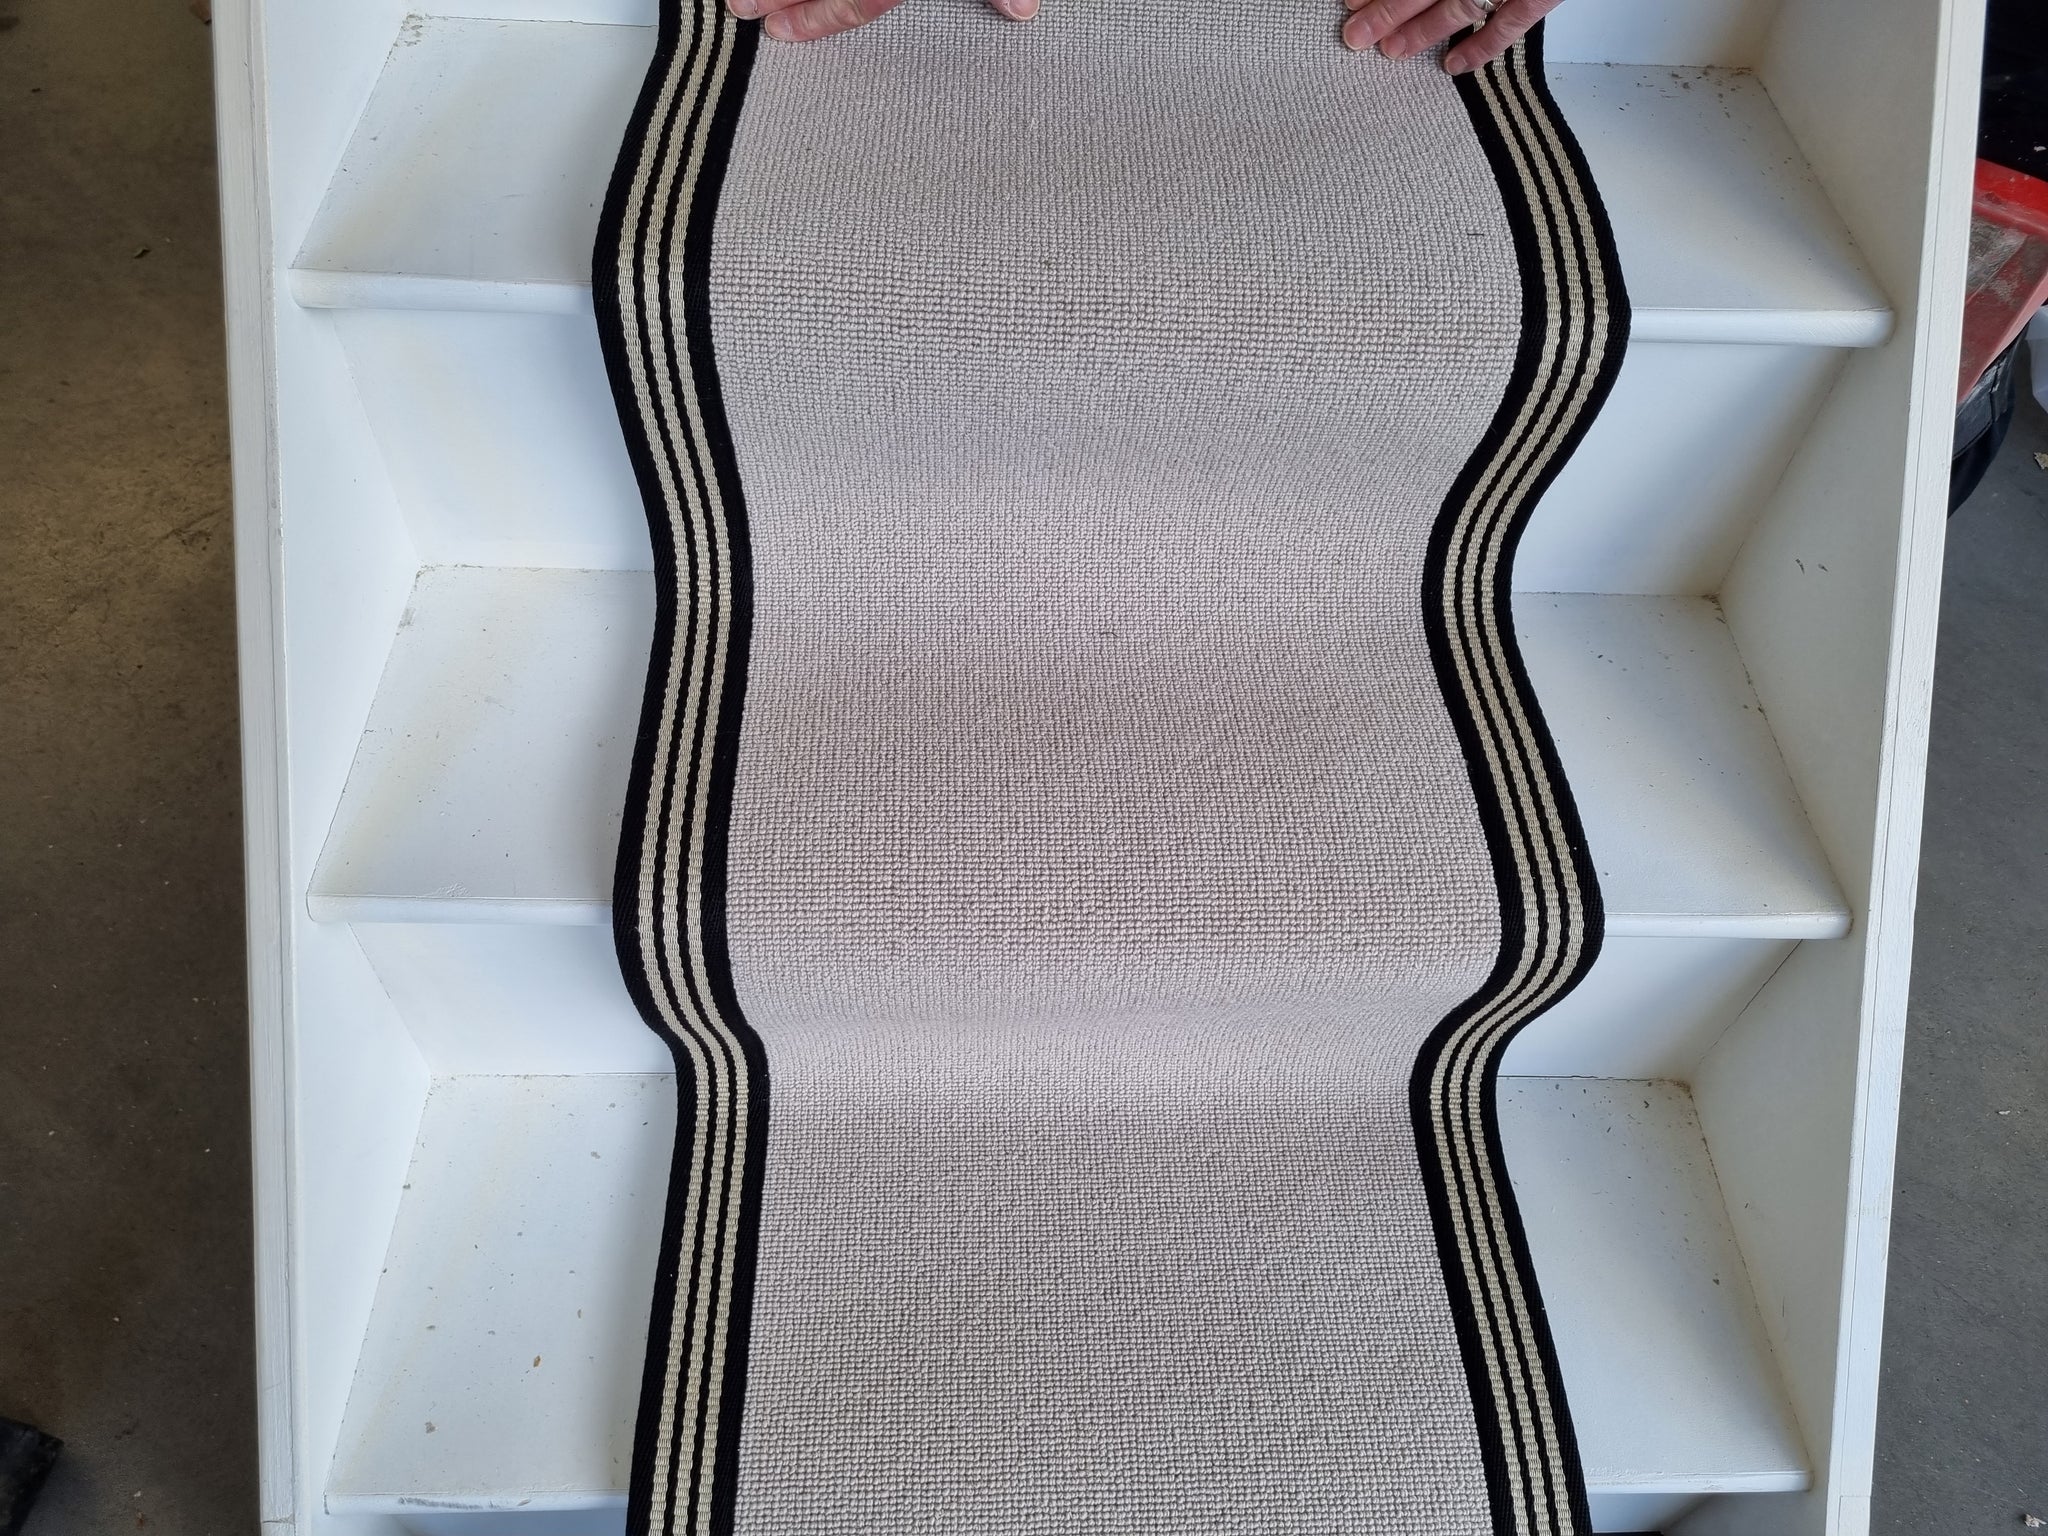 Cormar Pimlico Cement wool mix loop stair runner with striped black and white cotton border